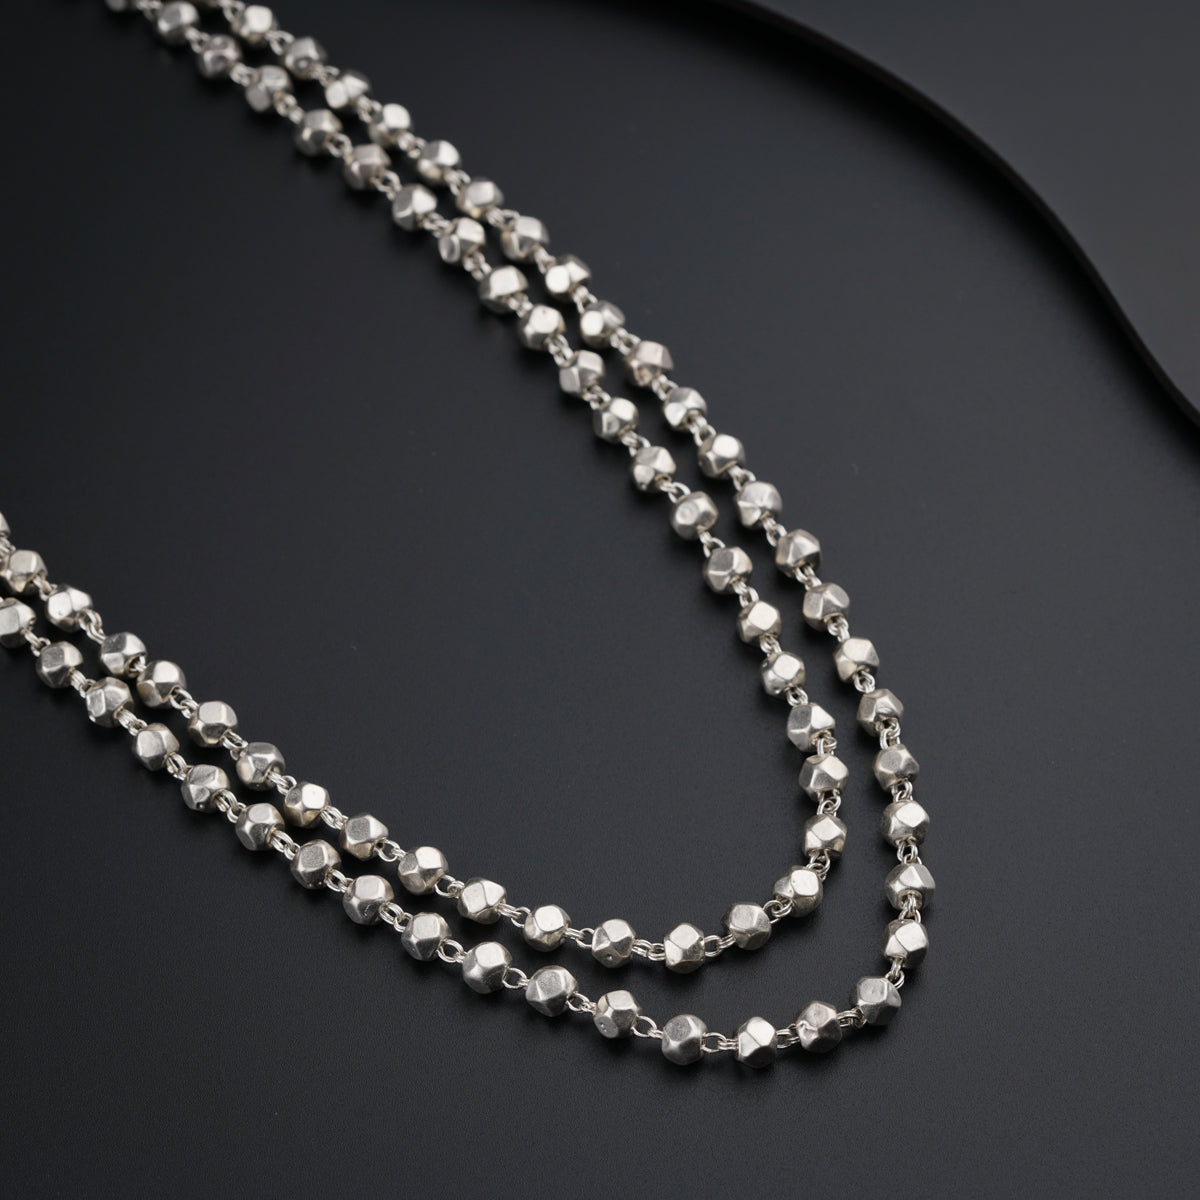 a long silver chain on a black surface